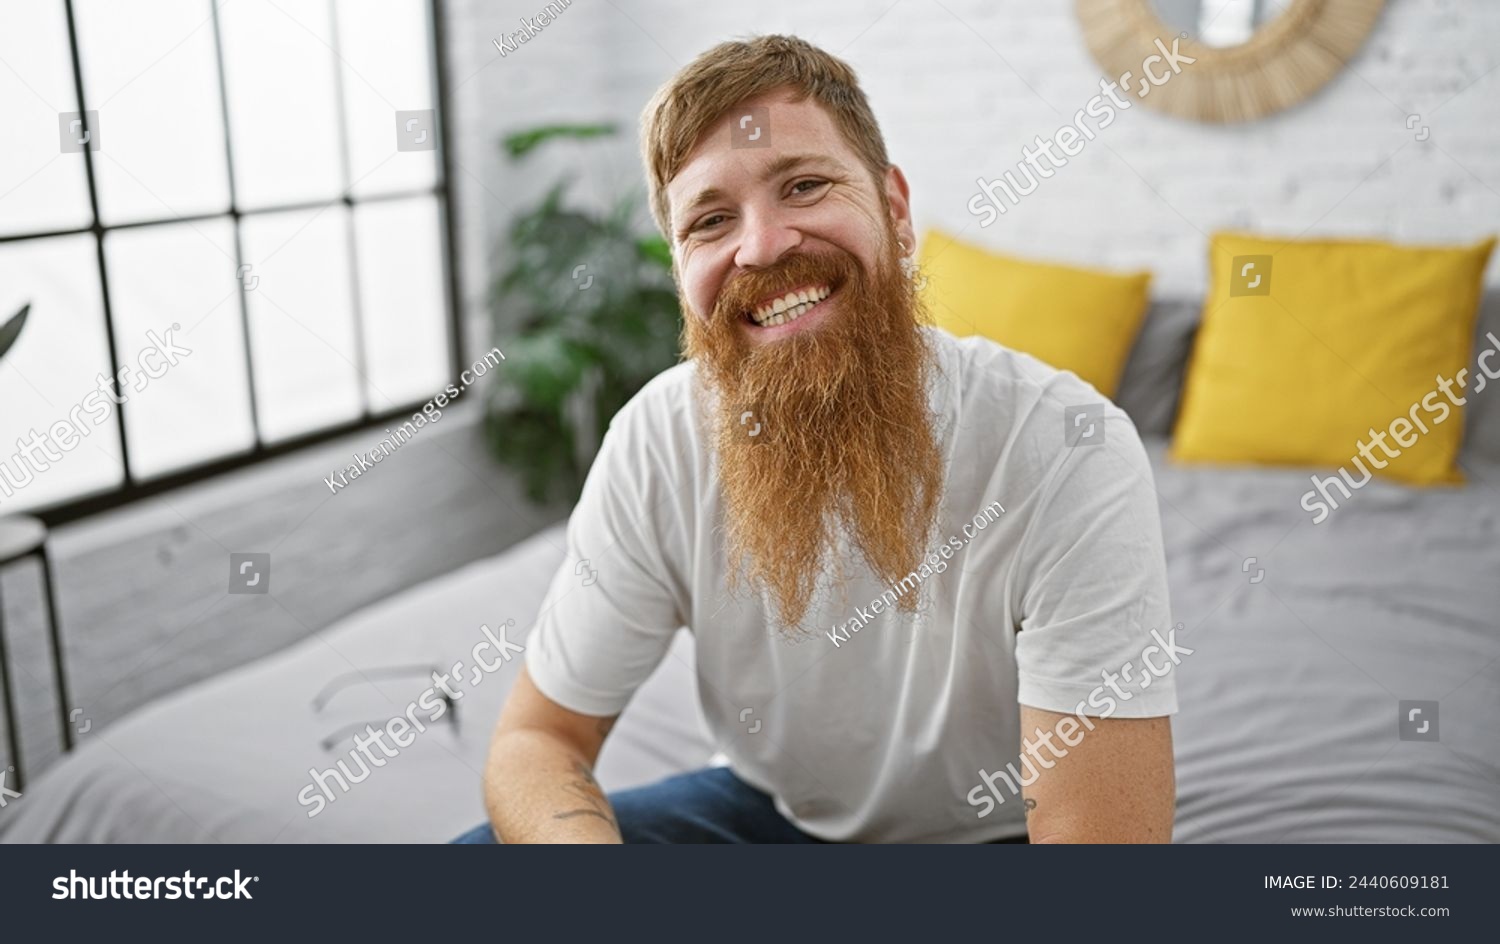 Wake up to a charming morning with a young, happy redhead man, sitting comfortably in bed, smiling confidently in his cozy bedroom, enjoying a relaxing moment of home comfort. #2440609181